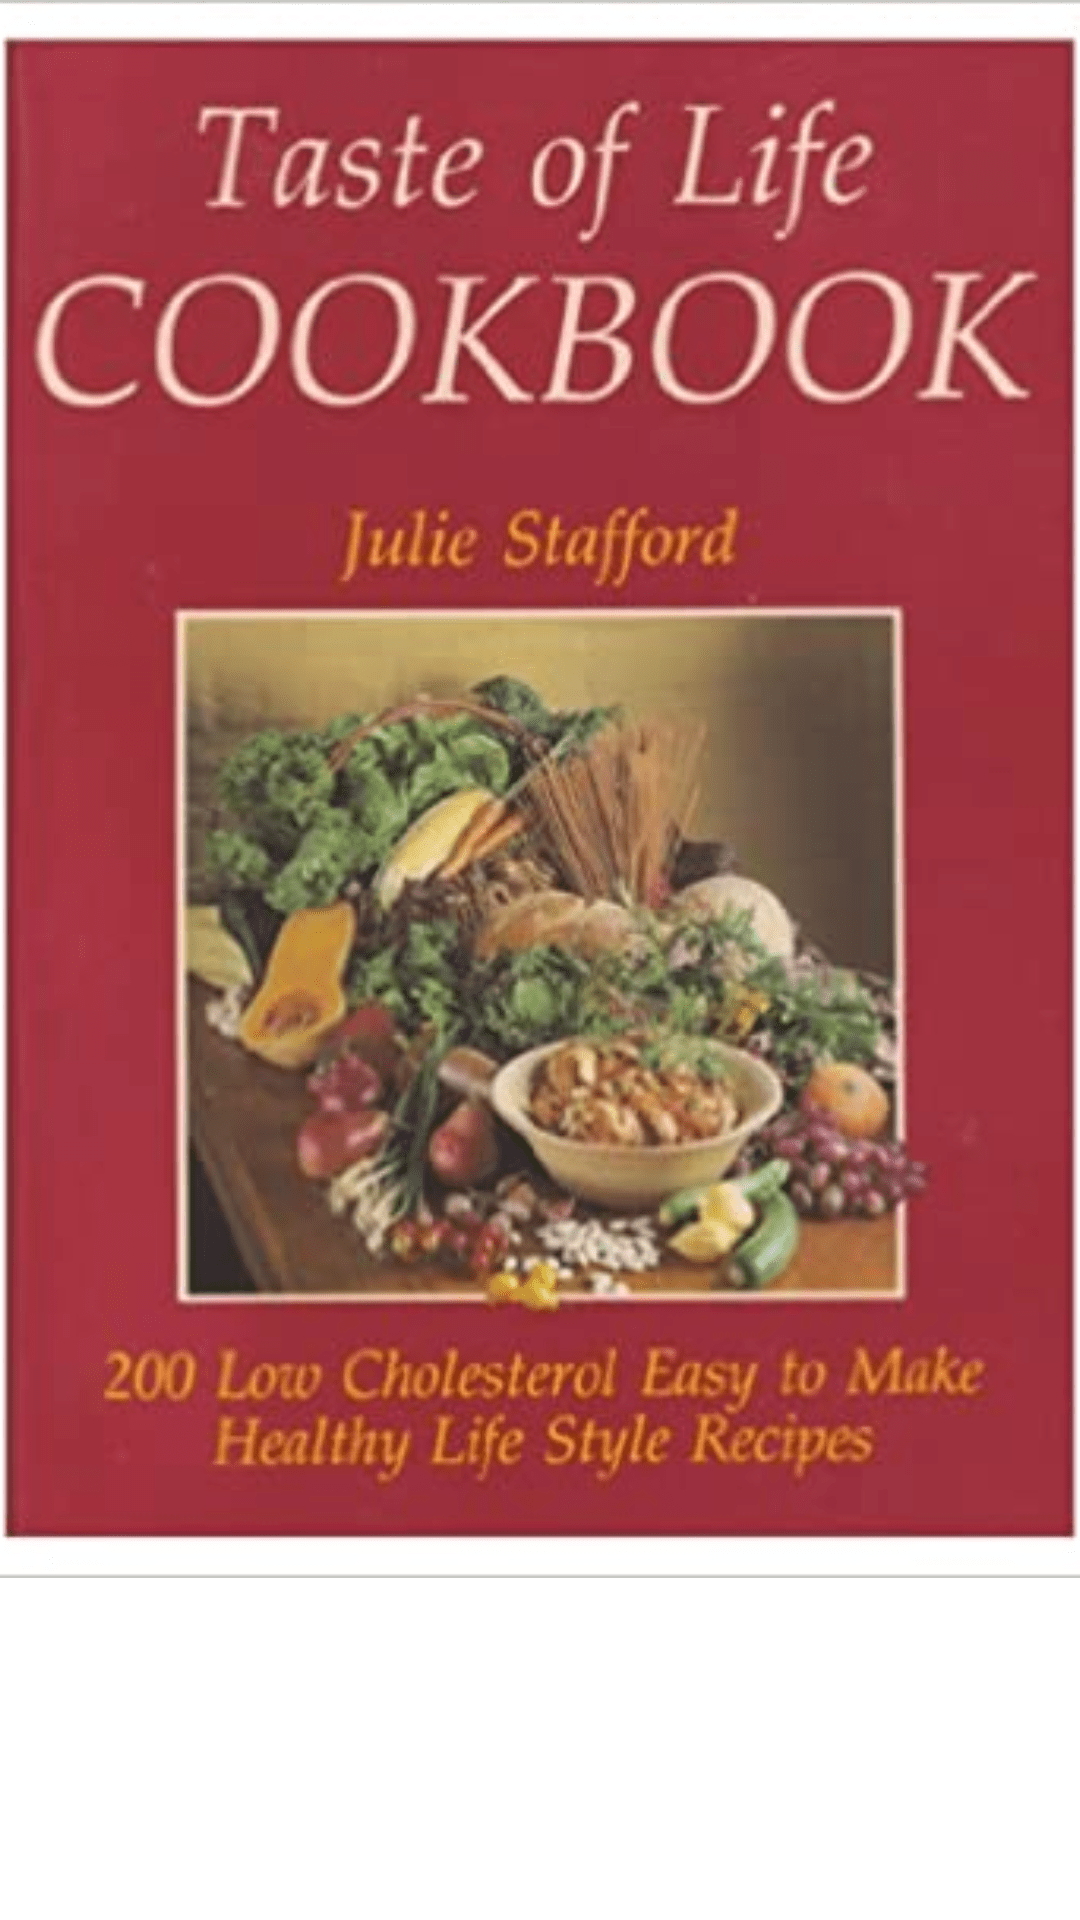 Taste of Life Cookbook : 200 Low Cholesterol Easy to Make Healthy Life Style Recipes